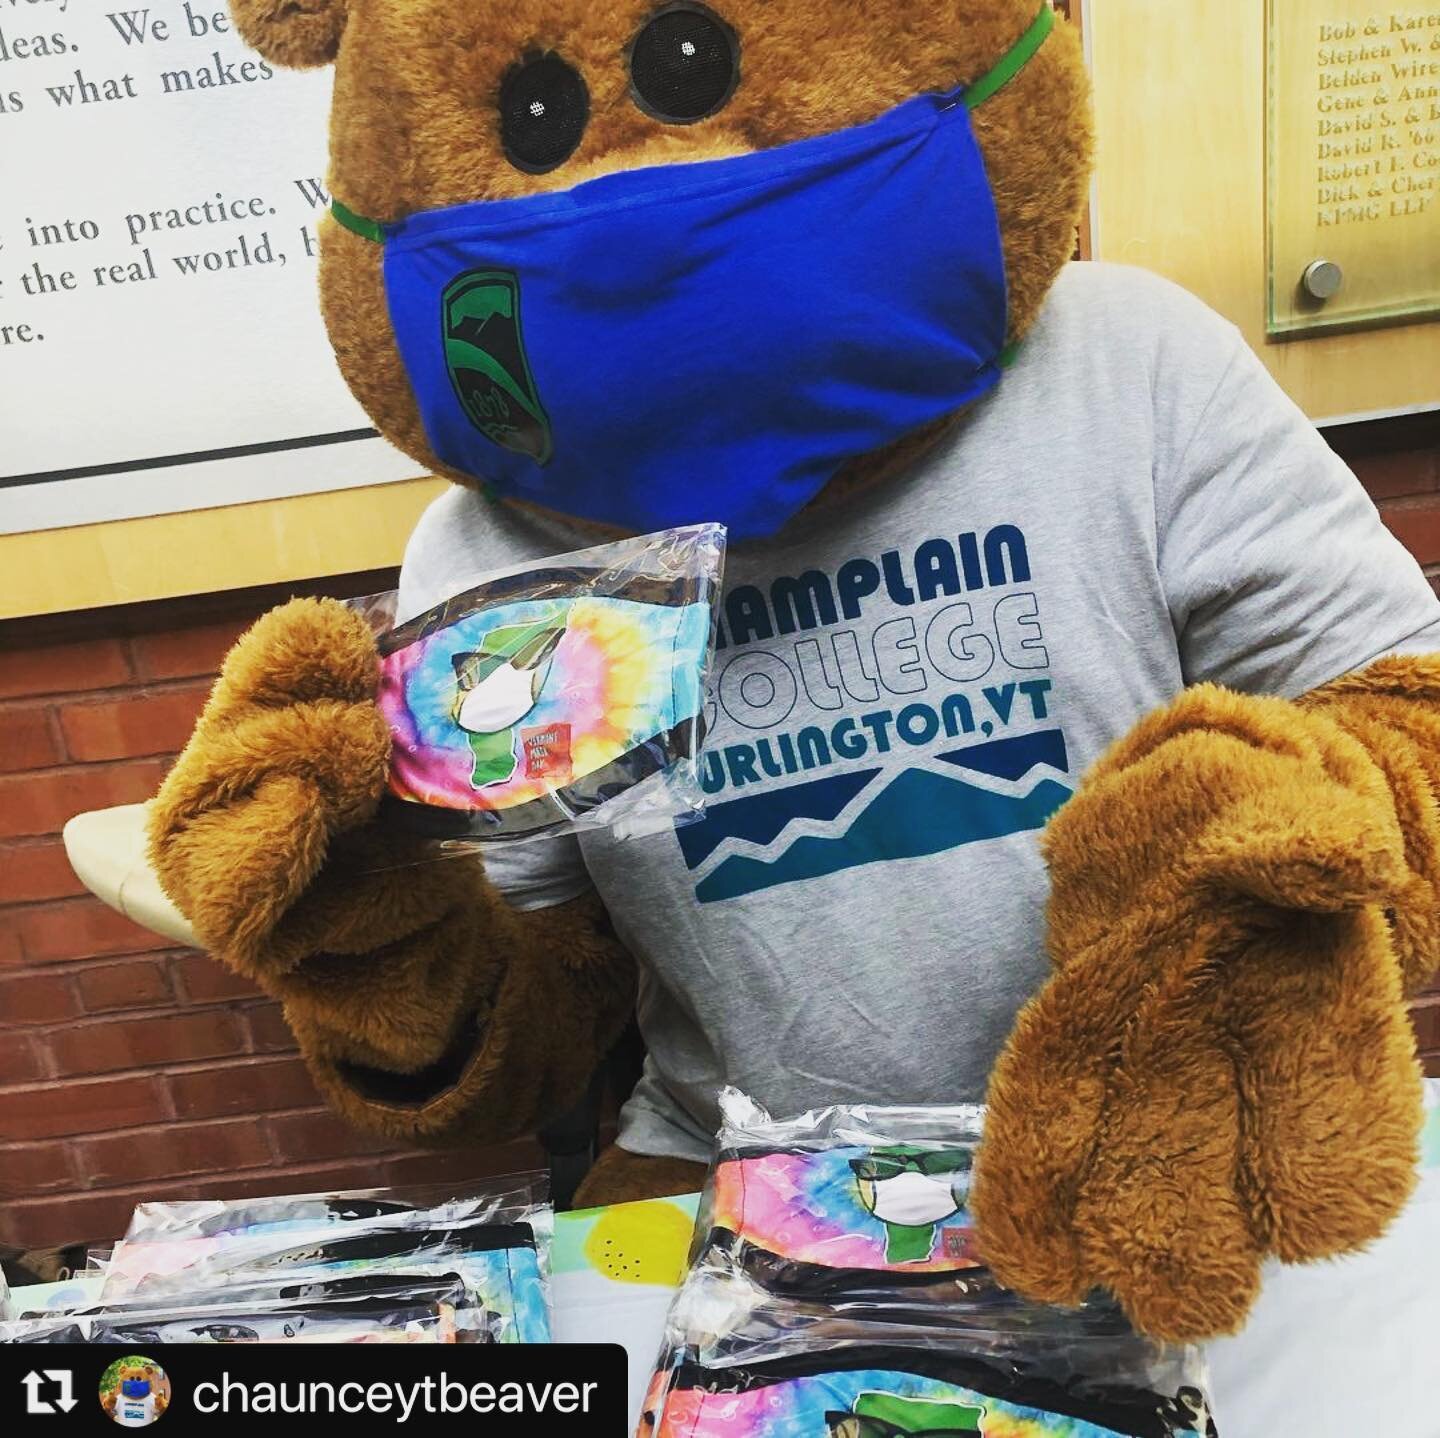 ICYMI: Check out @chaunceytbeaver handing out #vtmaskday masks! 
・・・
Repost: Happy Vermont Mask Day AND Champlain College Spirit Week!!! Stay safe, a WEAR your masks and show us your Champlain Spirit by posting pictures of you in your VT masks and Ch